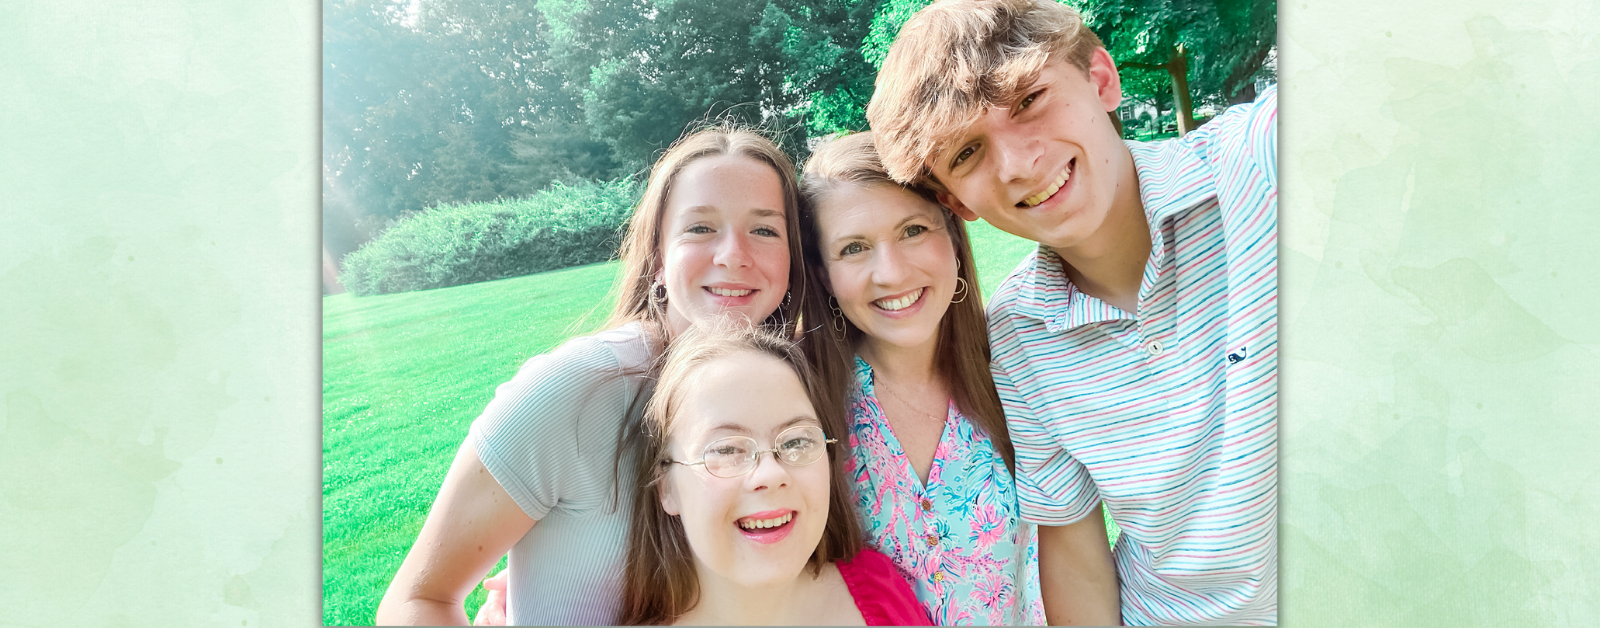 green background with photo of Penny, Marilee, Amy Julia, and William crowding together for a selfie outside